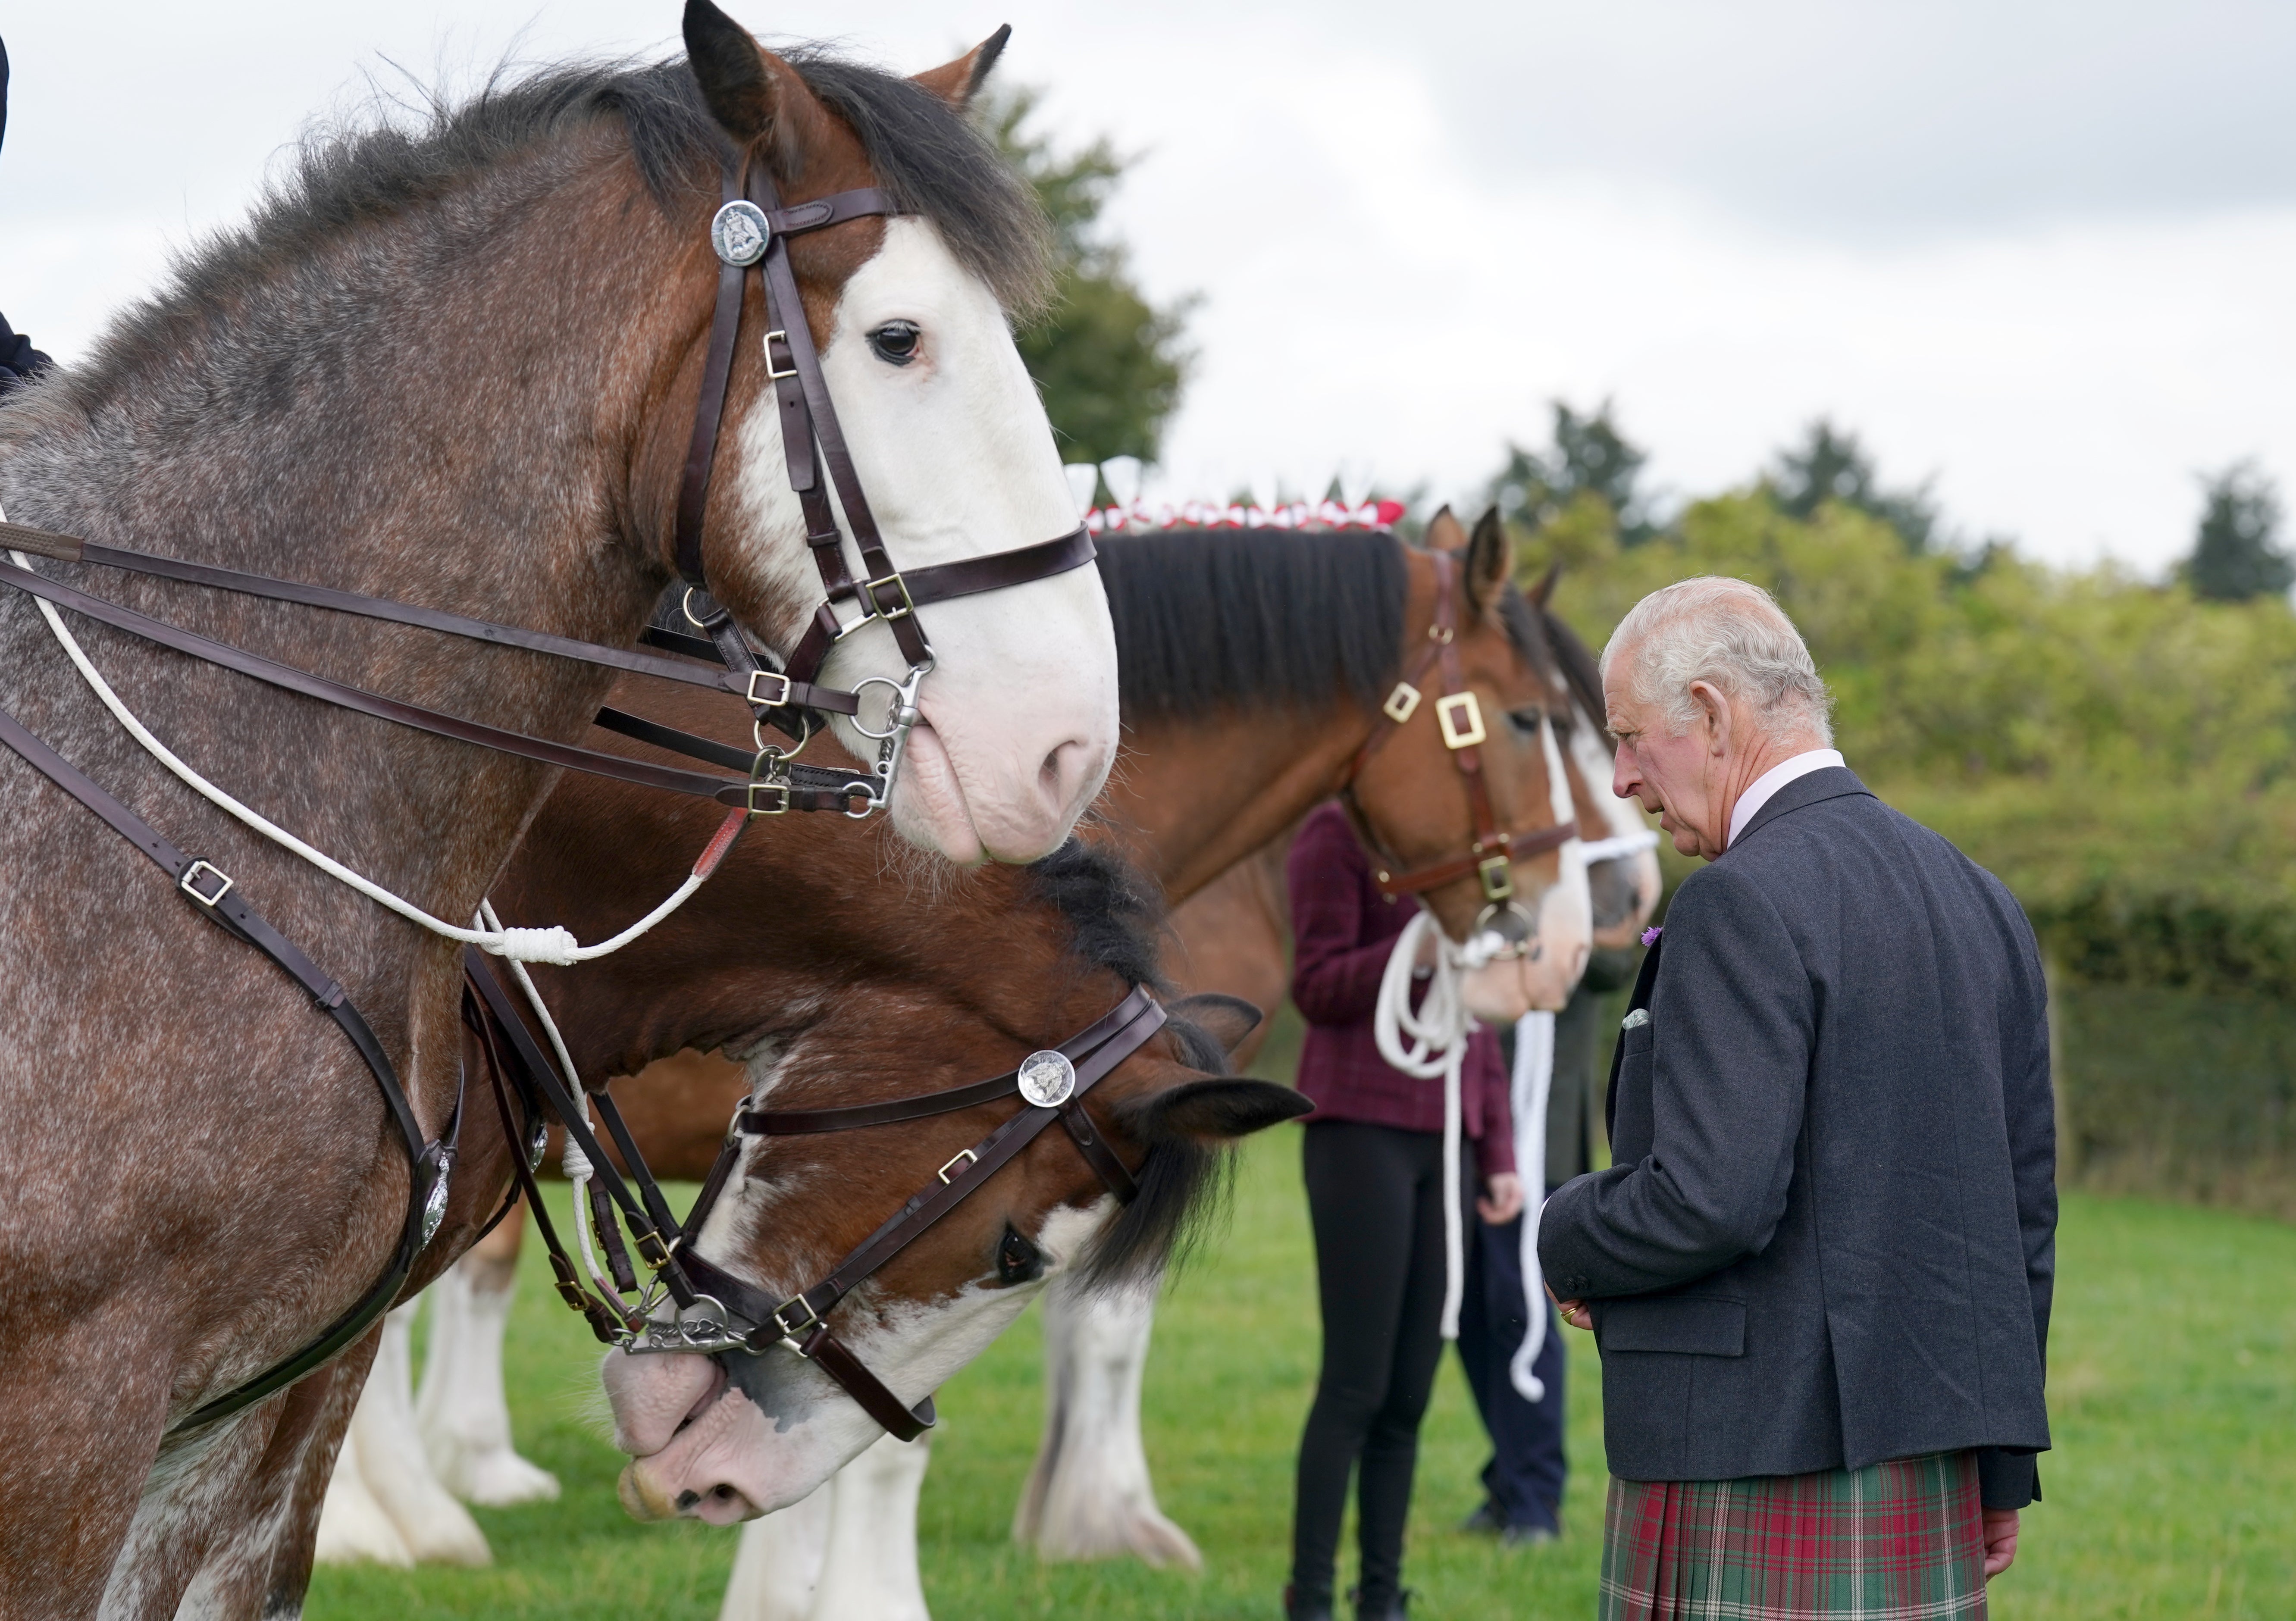 The Prince of Wales stroked some of the Clydesdale horses before enjoying a carriage ride (Andrew Milligan/PA)